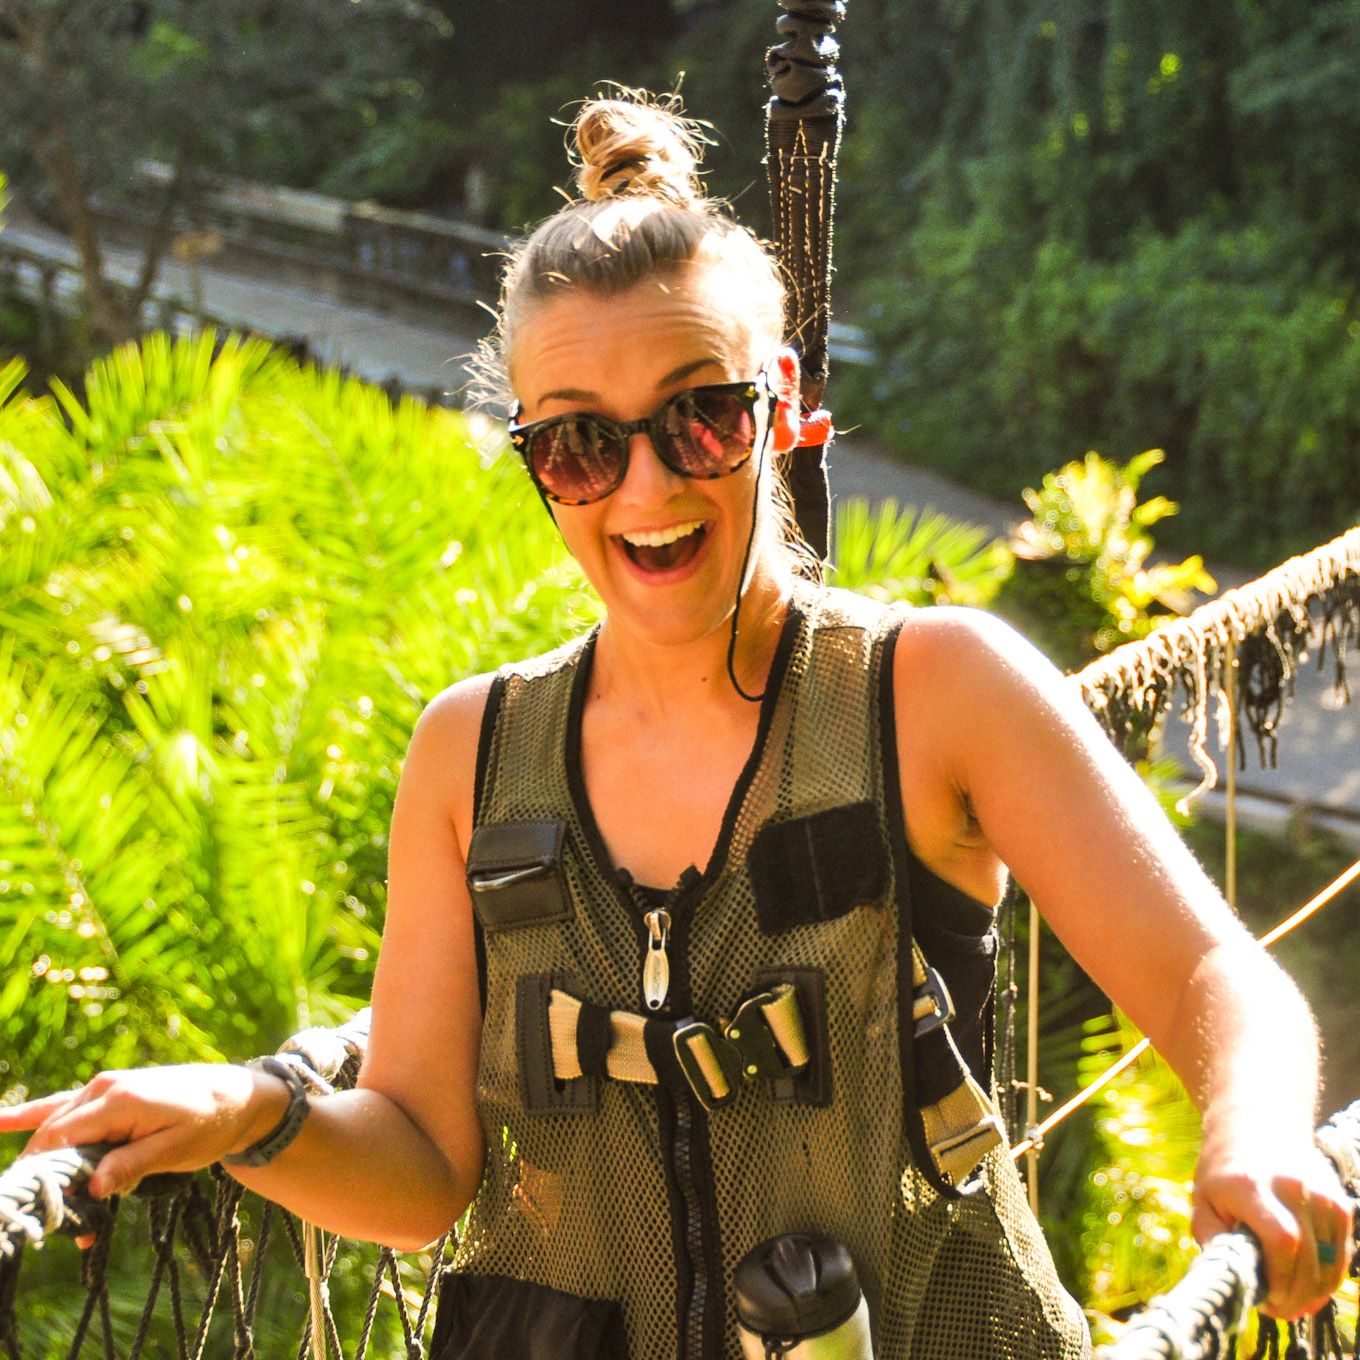 Marissa with a big smile, harnessed while on an outdoor excursion